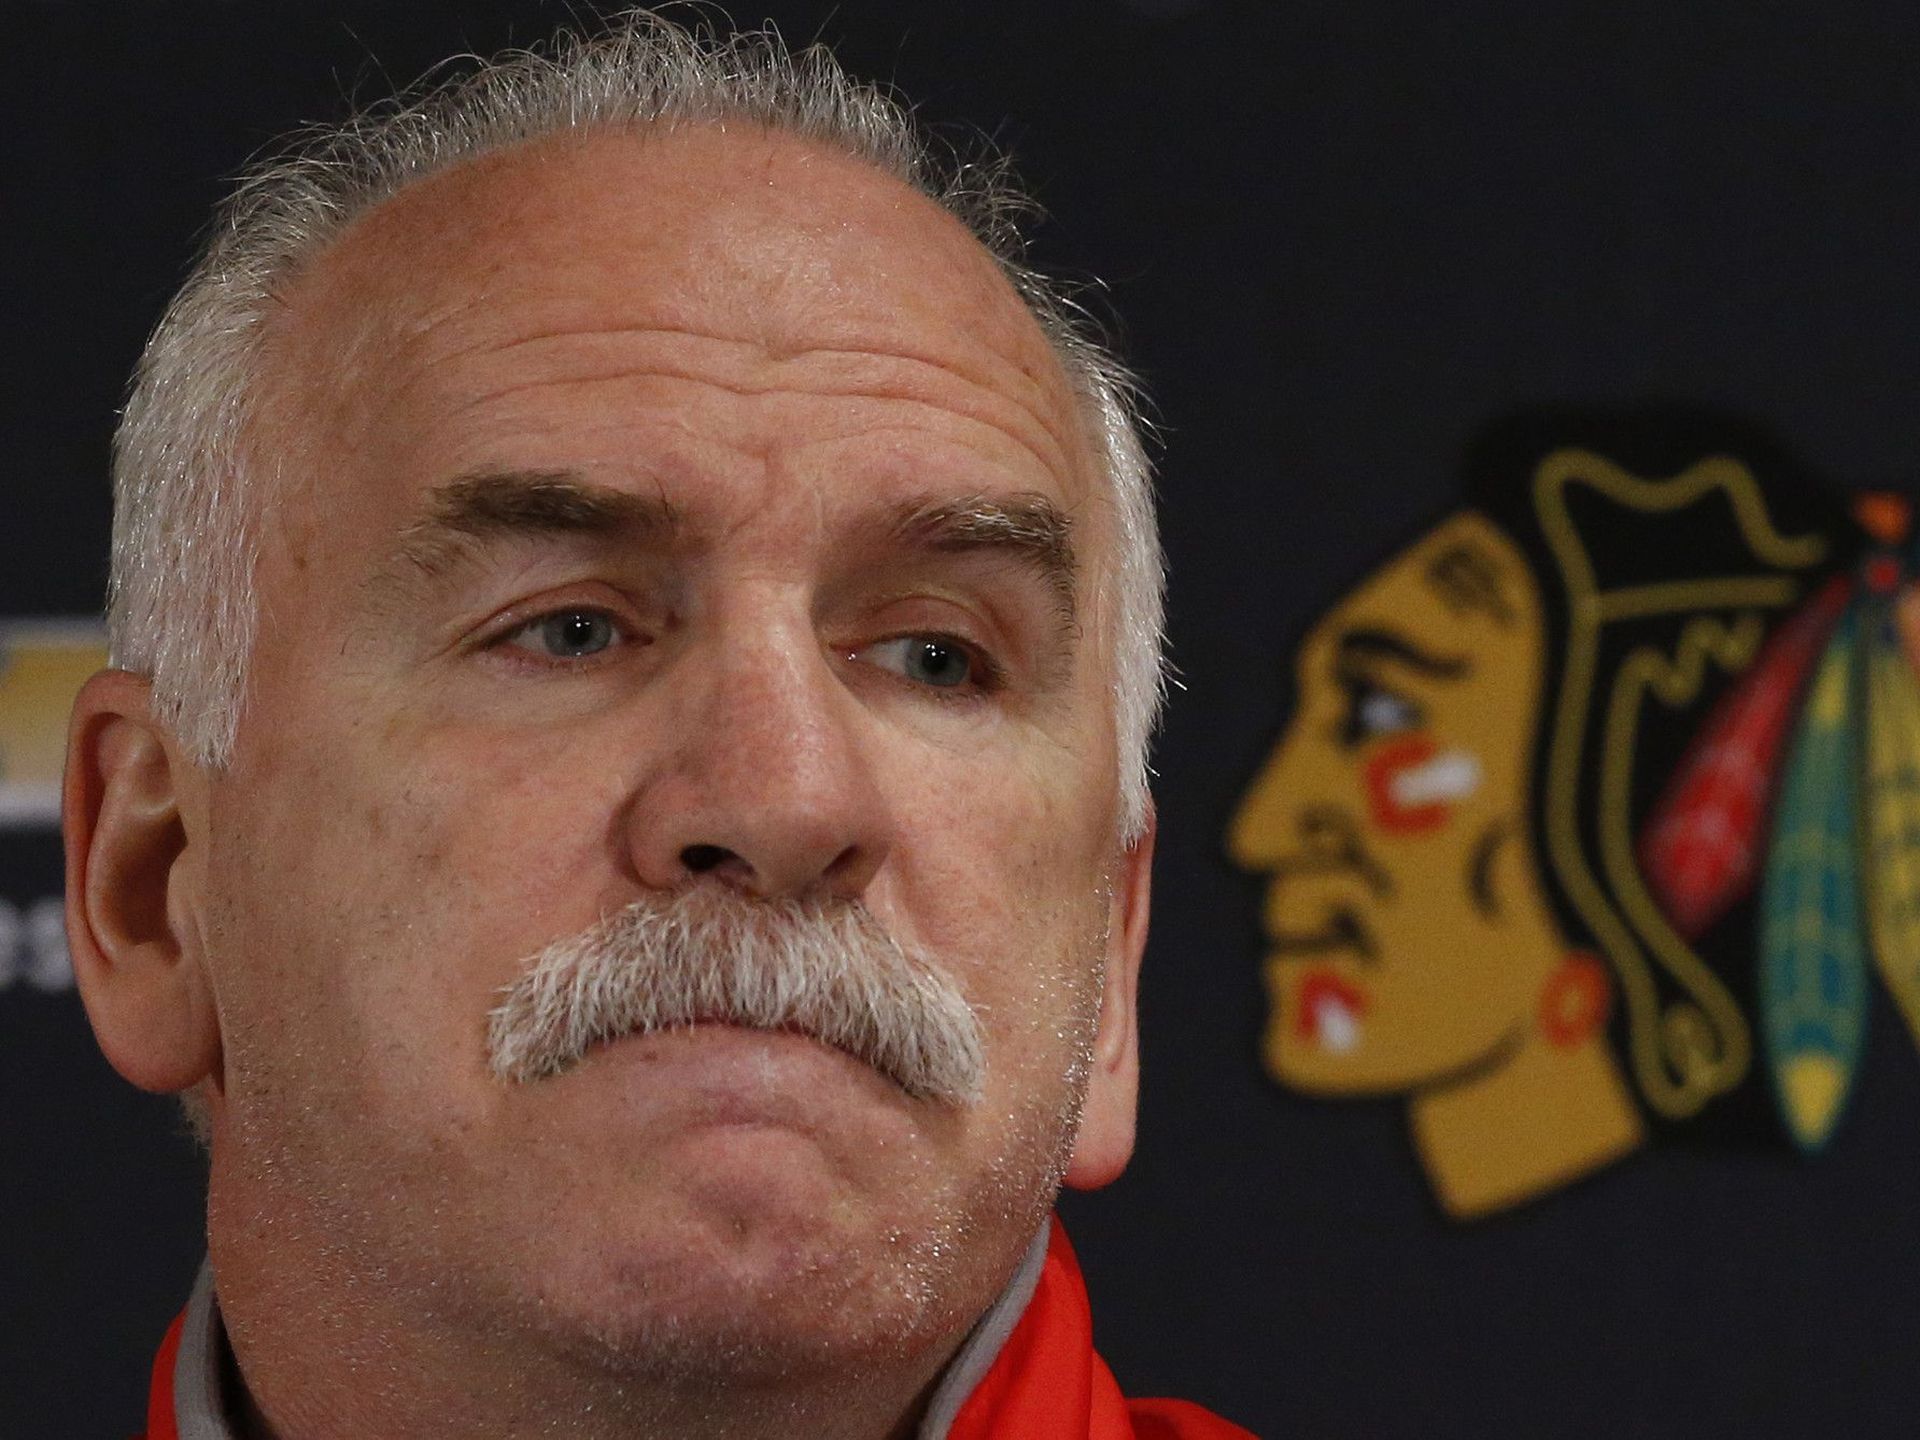 Joel Quenneville resigns as coach of the Florida Panthers